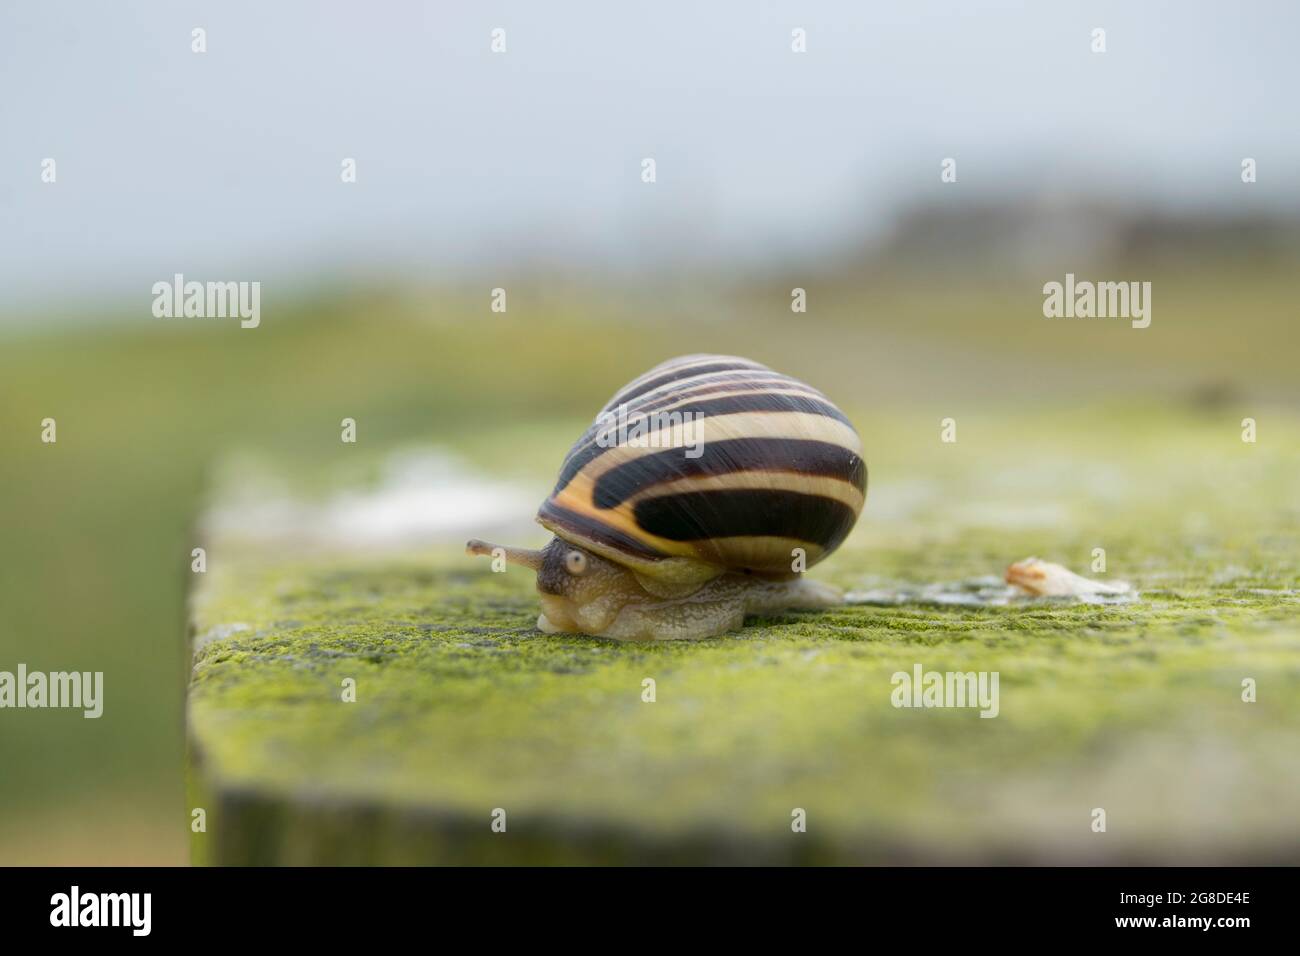 Striped snail on a fence post Stock Photo